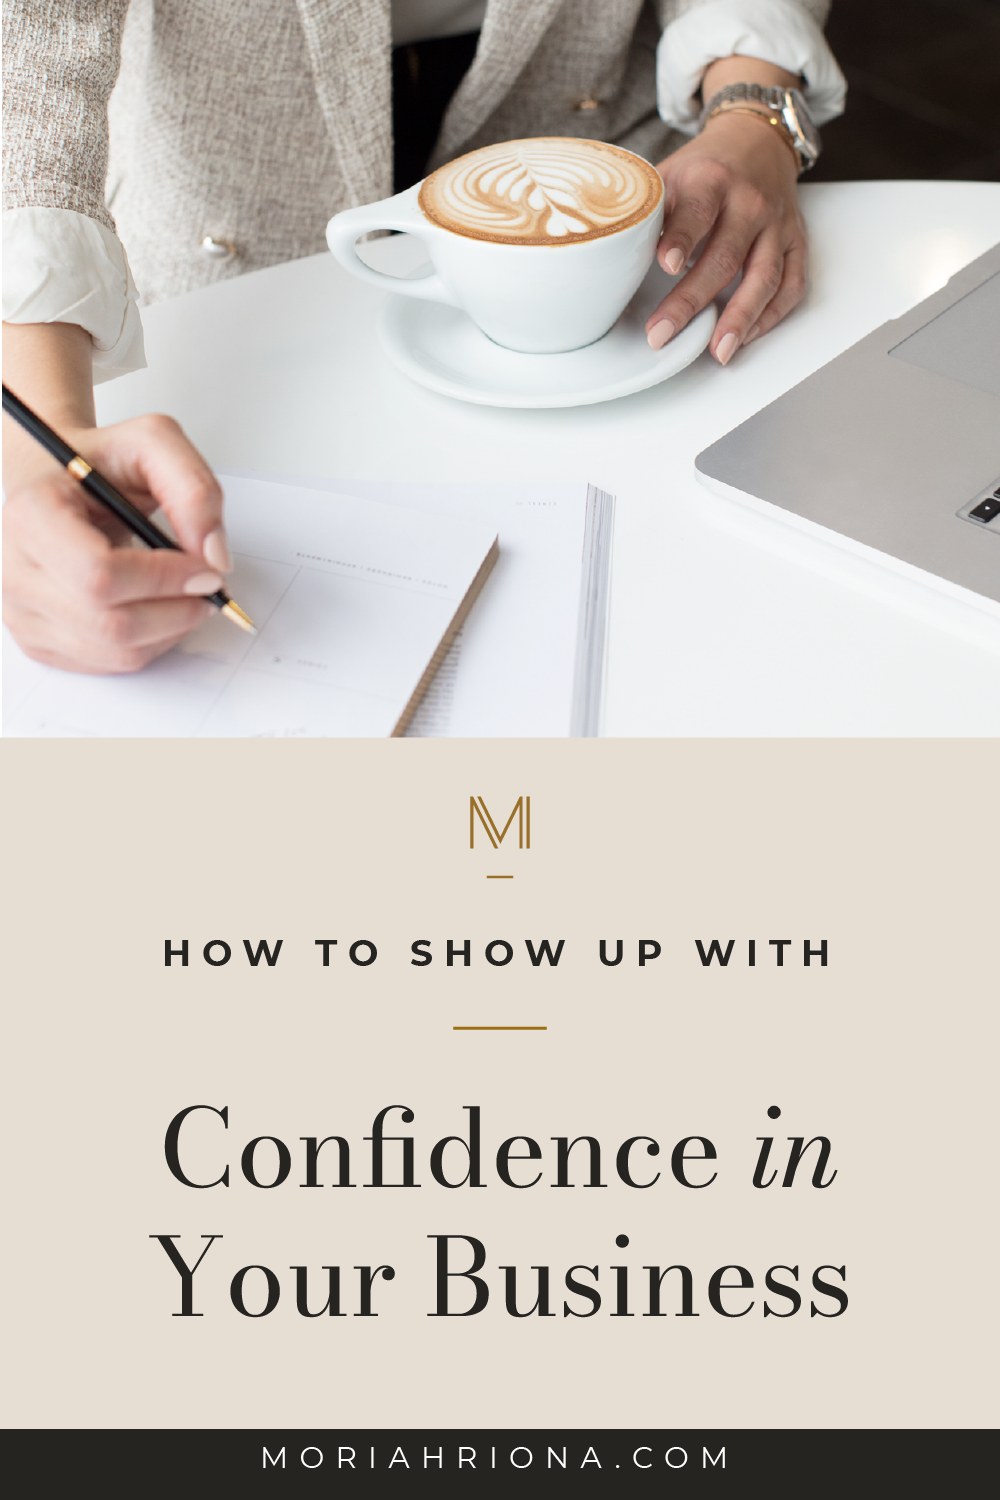 Looking for the best tips for introverts in business? This video is for you! I’m sharing my best introvert motivation, how to show up with confidence, and how confident entrepreneurs show up in business. #introvert #confidence #business #entrepreneur